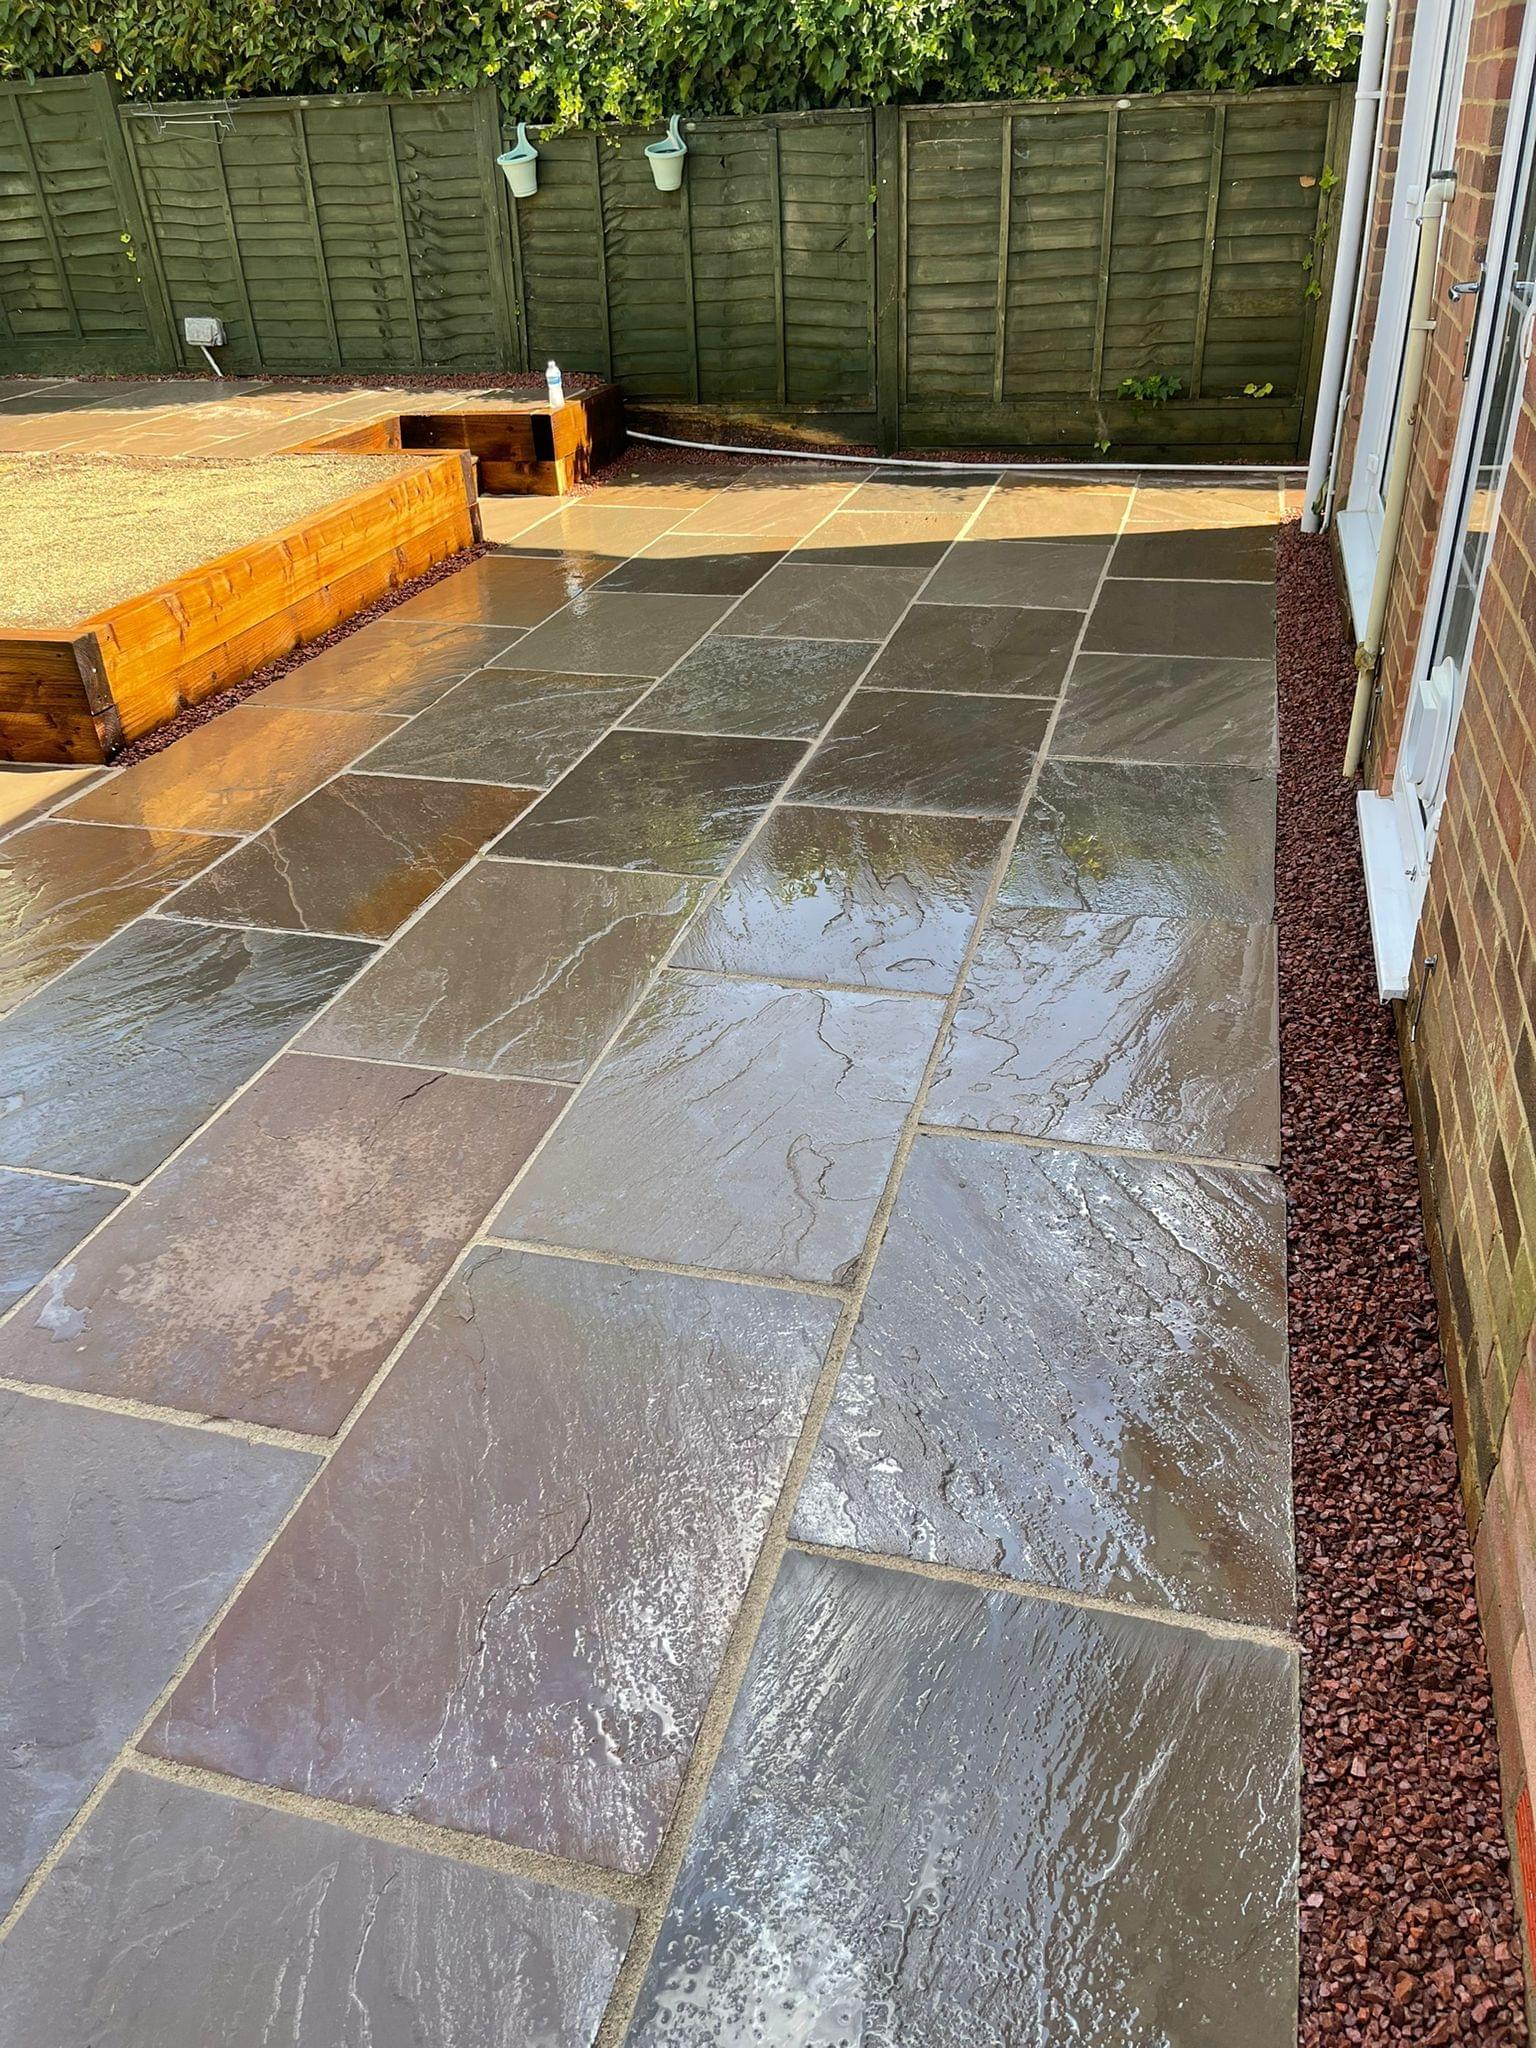 Autumn Brown Indian Sandstone Paving Slabs - Riven - 900x600 - 22mm